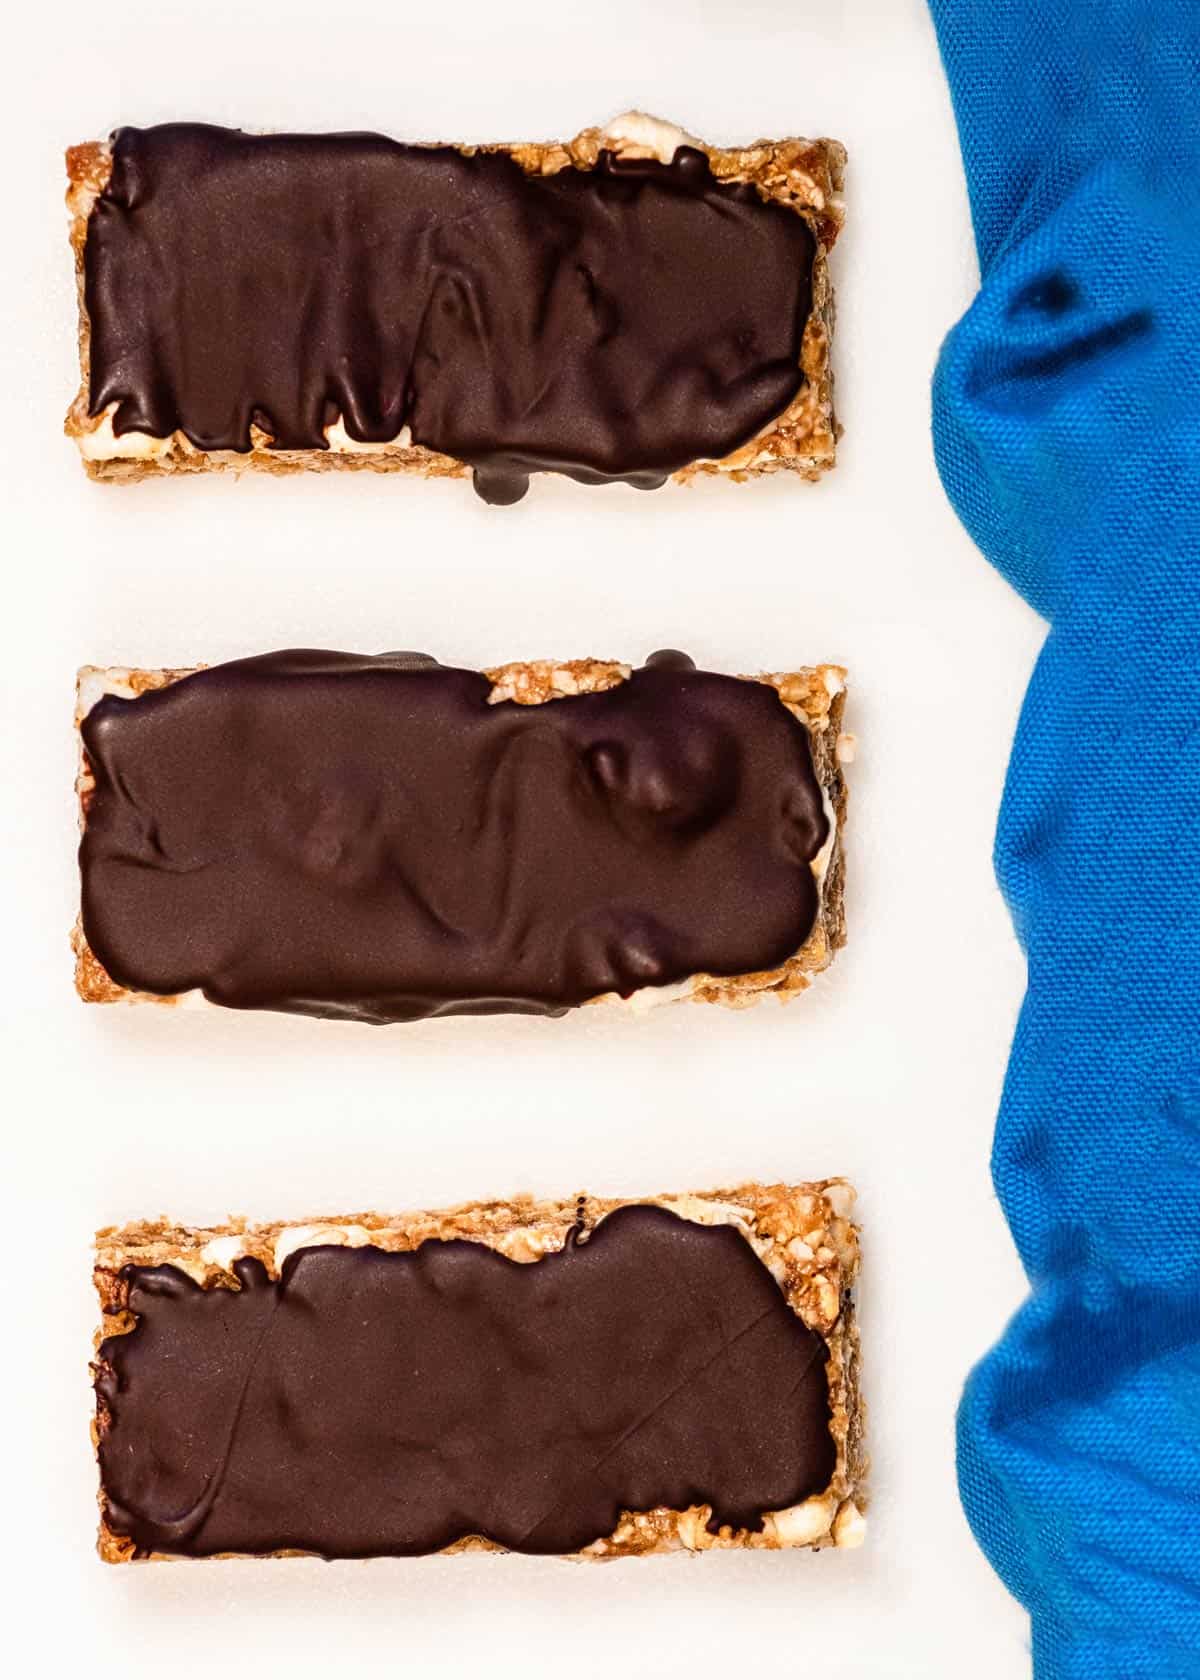 3 chocolate covered peanut butter s'mores granola bars on a white counter with a blue towel next to it.